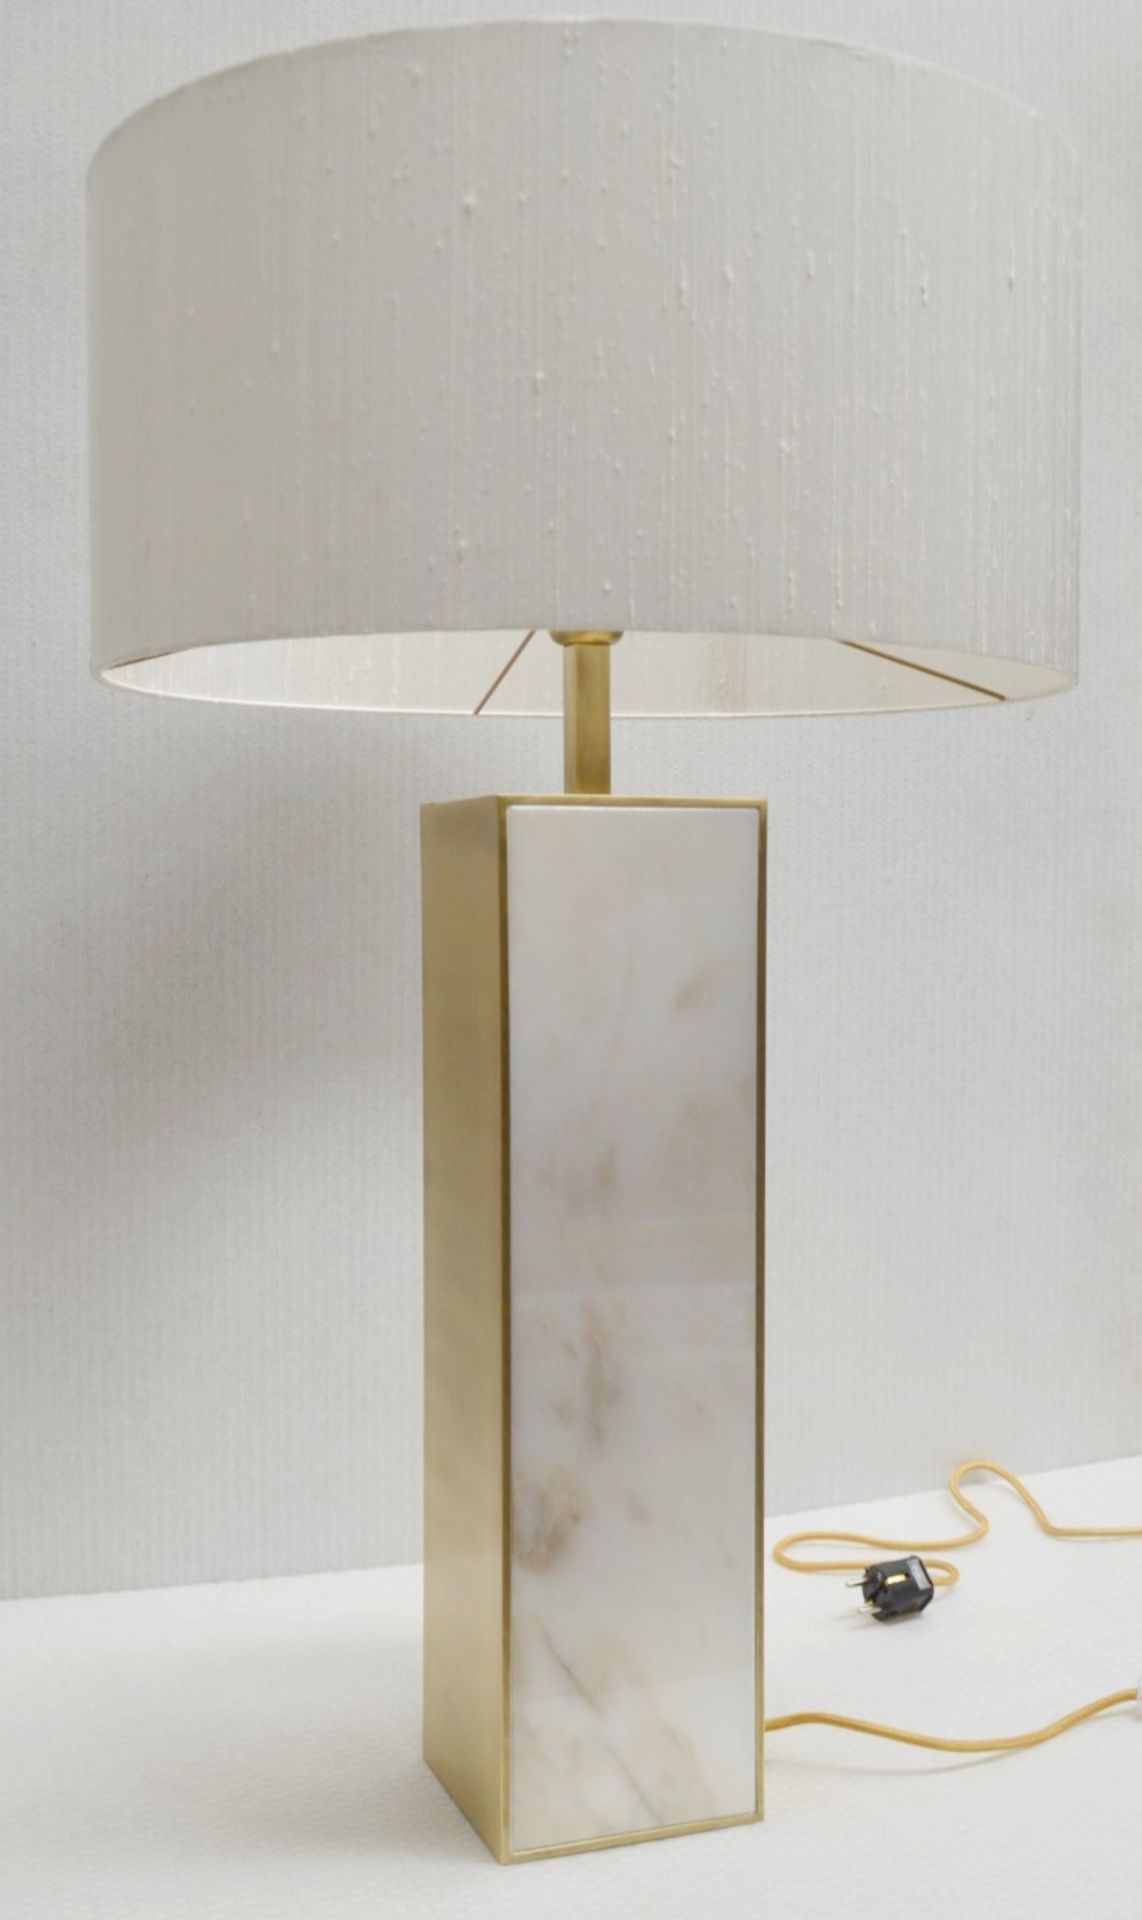 1 x FRATO BIARRITZ Luxury Table Lamp With A Variegated Stone & Brass Base - Original RRP £1,544 - Image 2 of 15